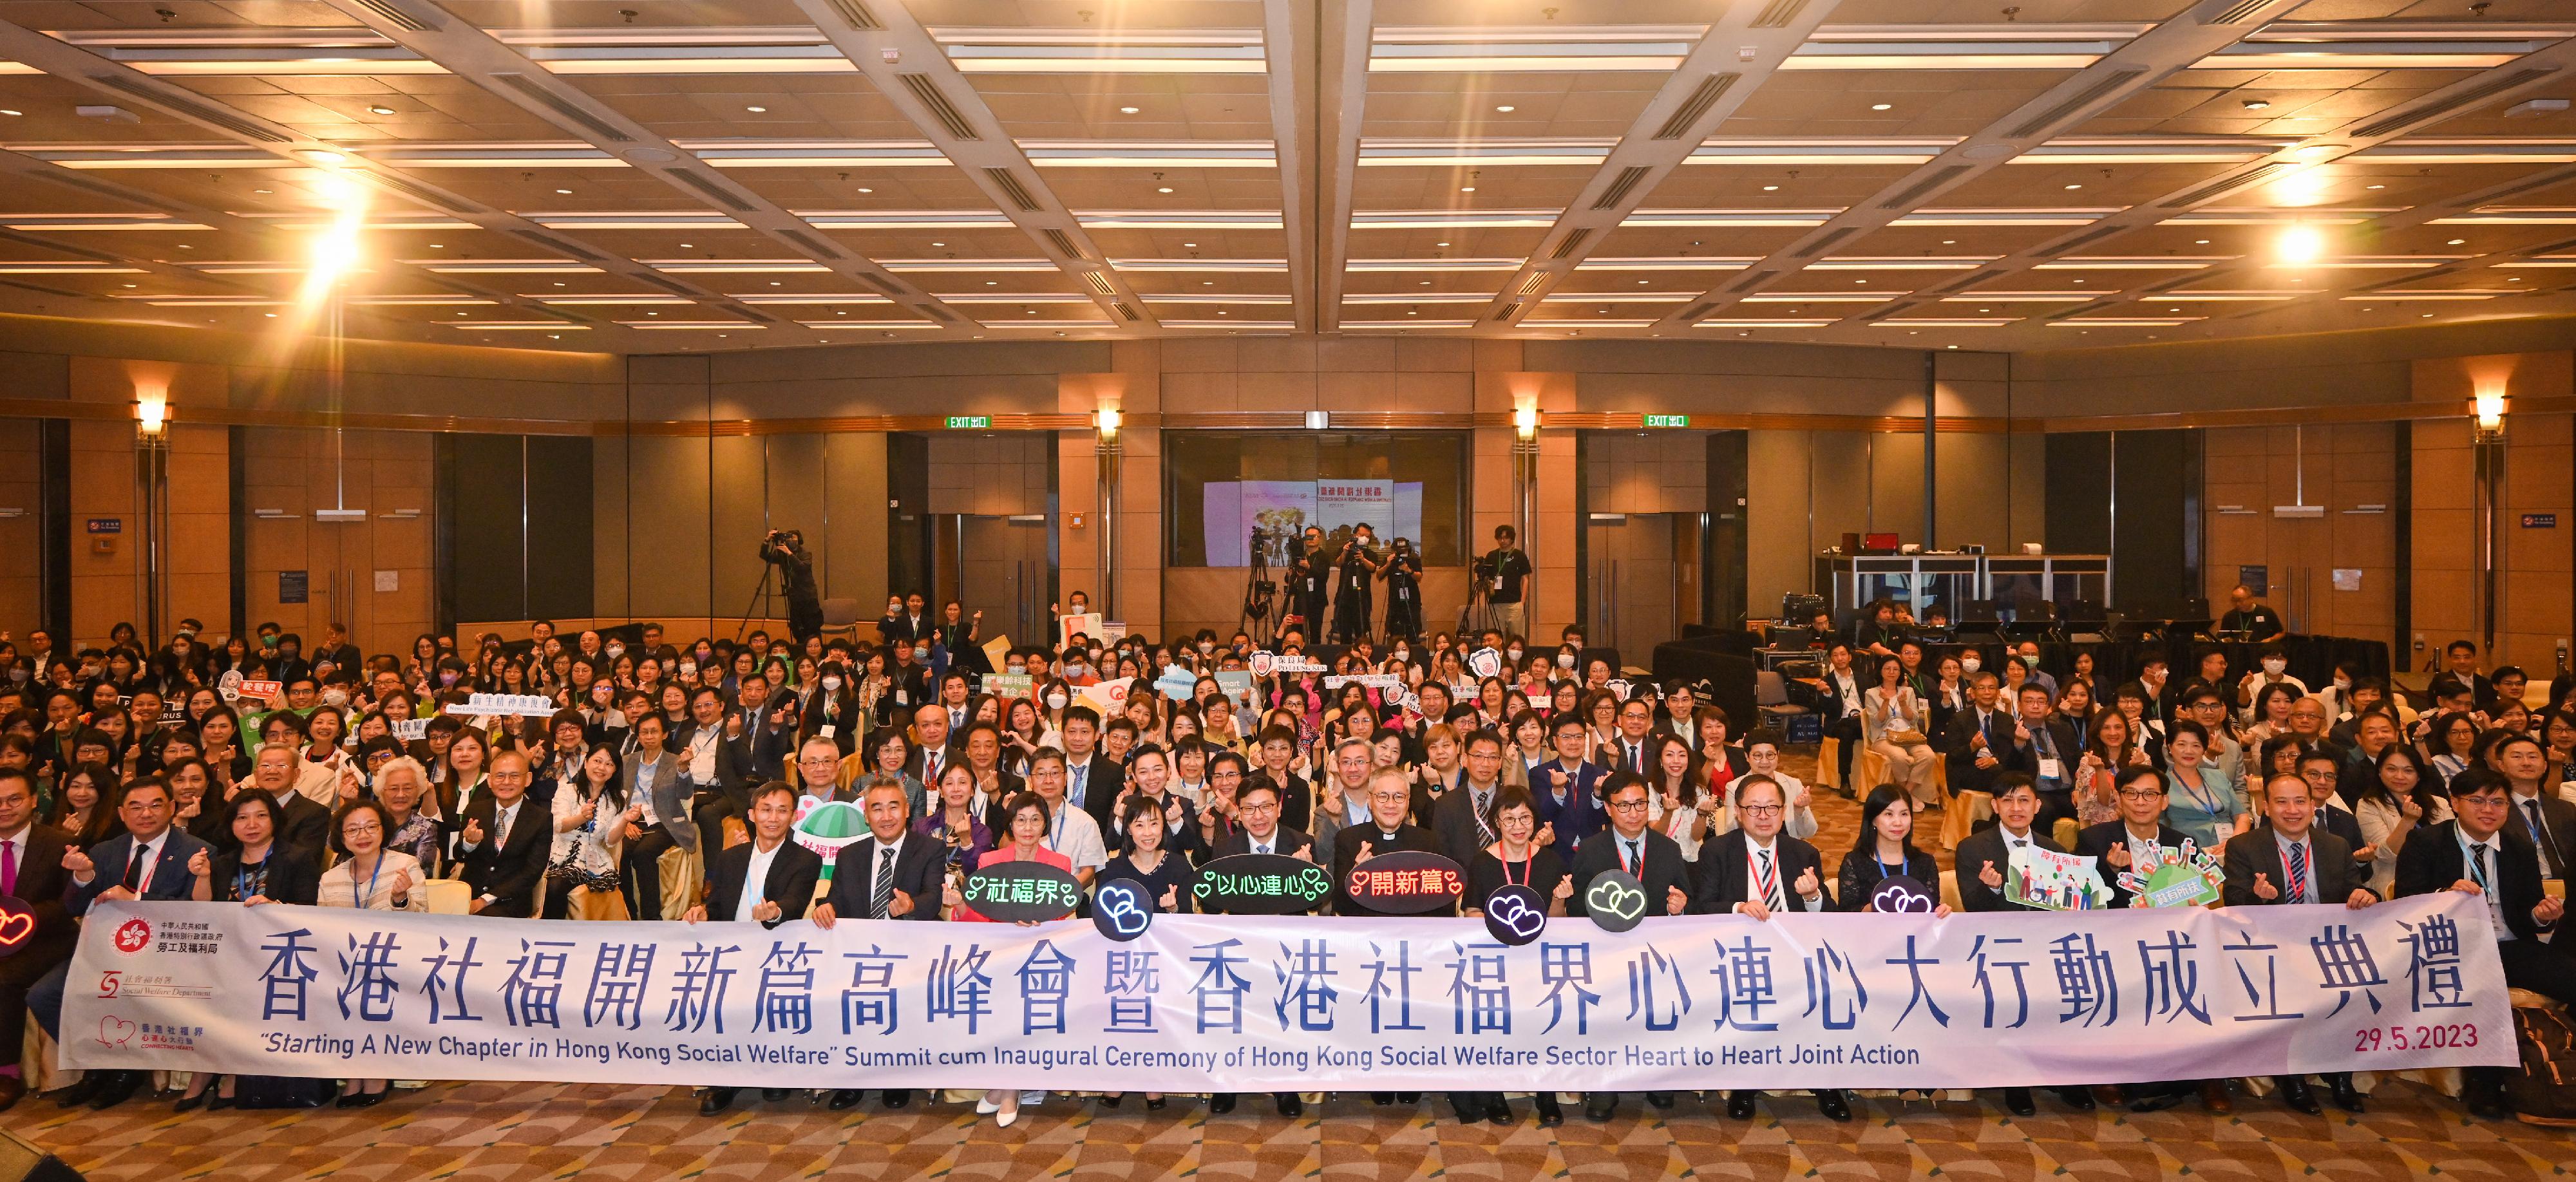 The Starting a New Chapter in Hong Kong Social Welfare Summit cum Inaugural Ceremony of Hong Kong Social Welfare Sector Heart to Heart Joint Action was held today (May 29). Photo shows participants in a group photo at the closing ceremony of the Summit.